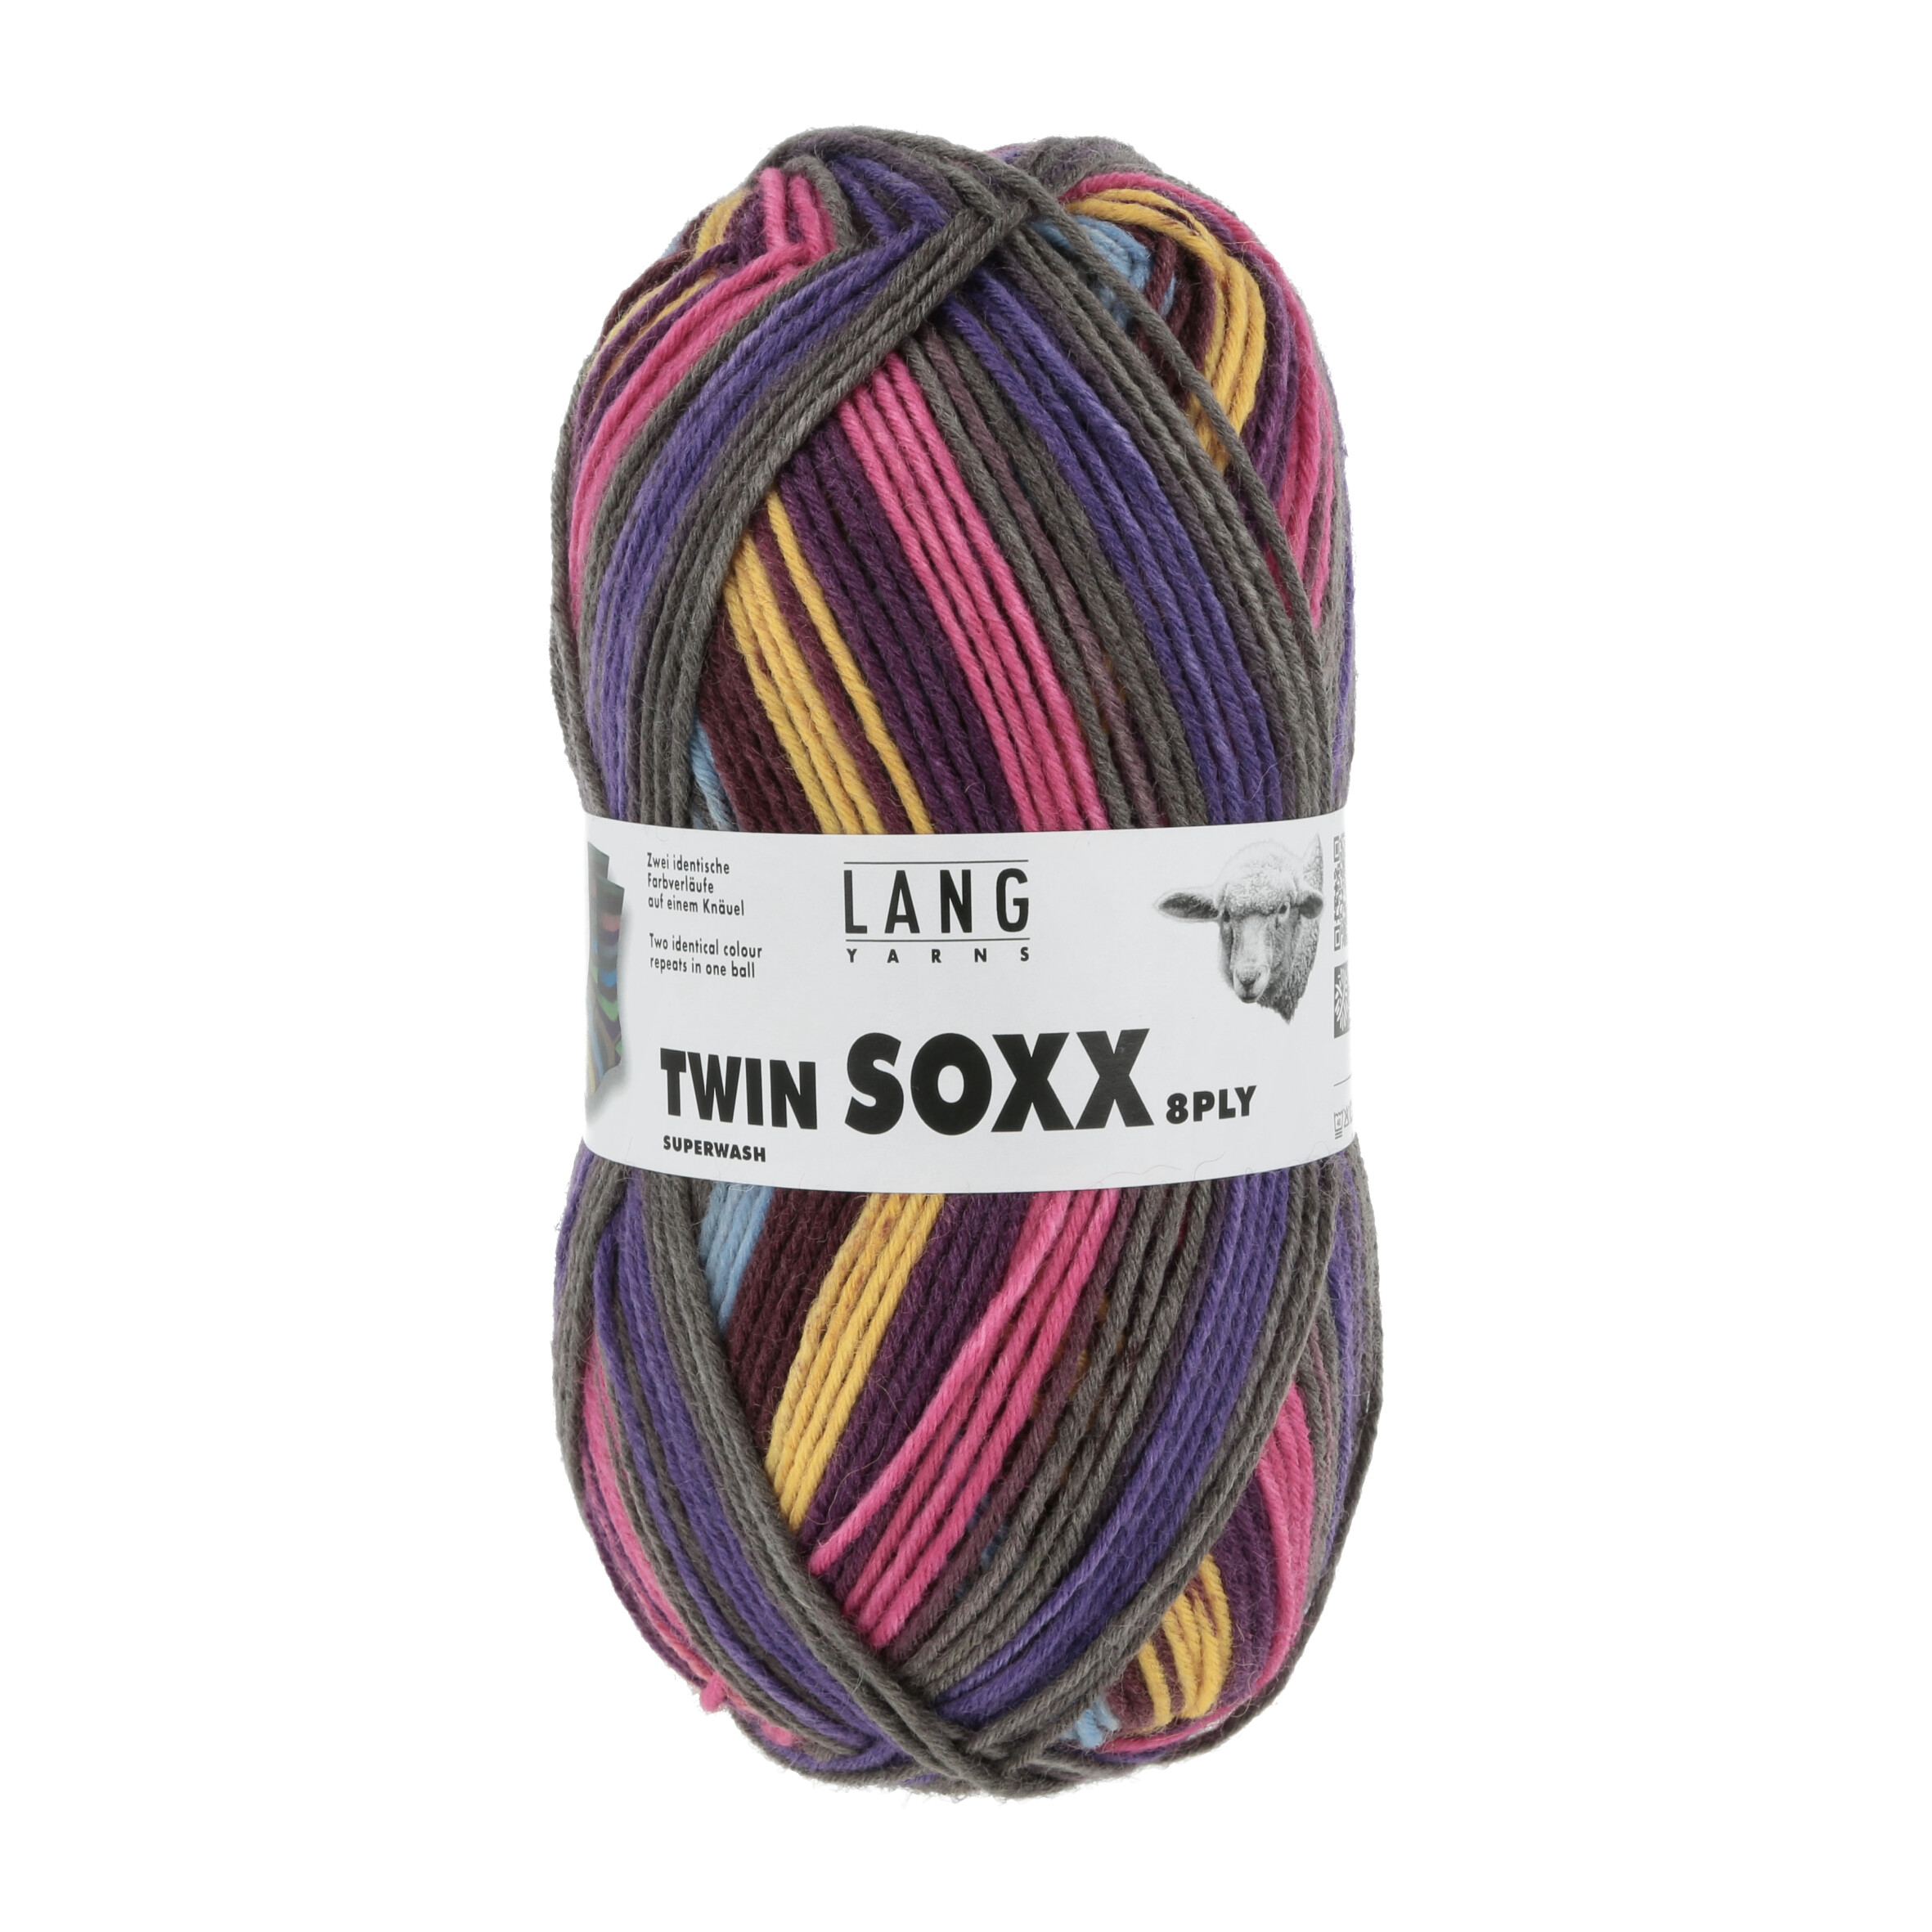 TwinSoxx 8ply